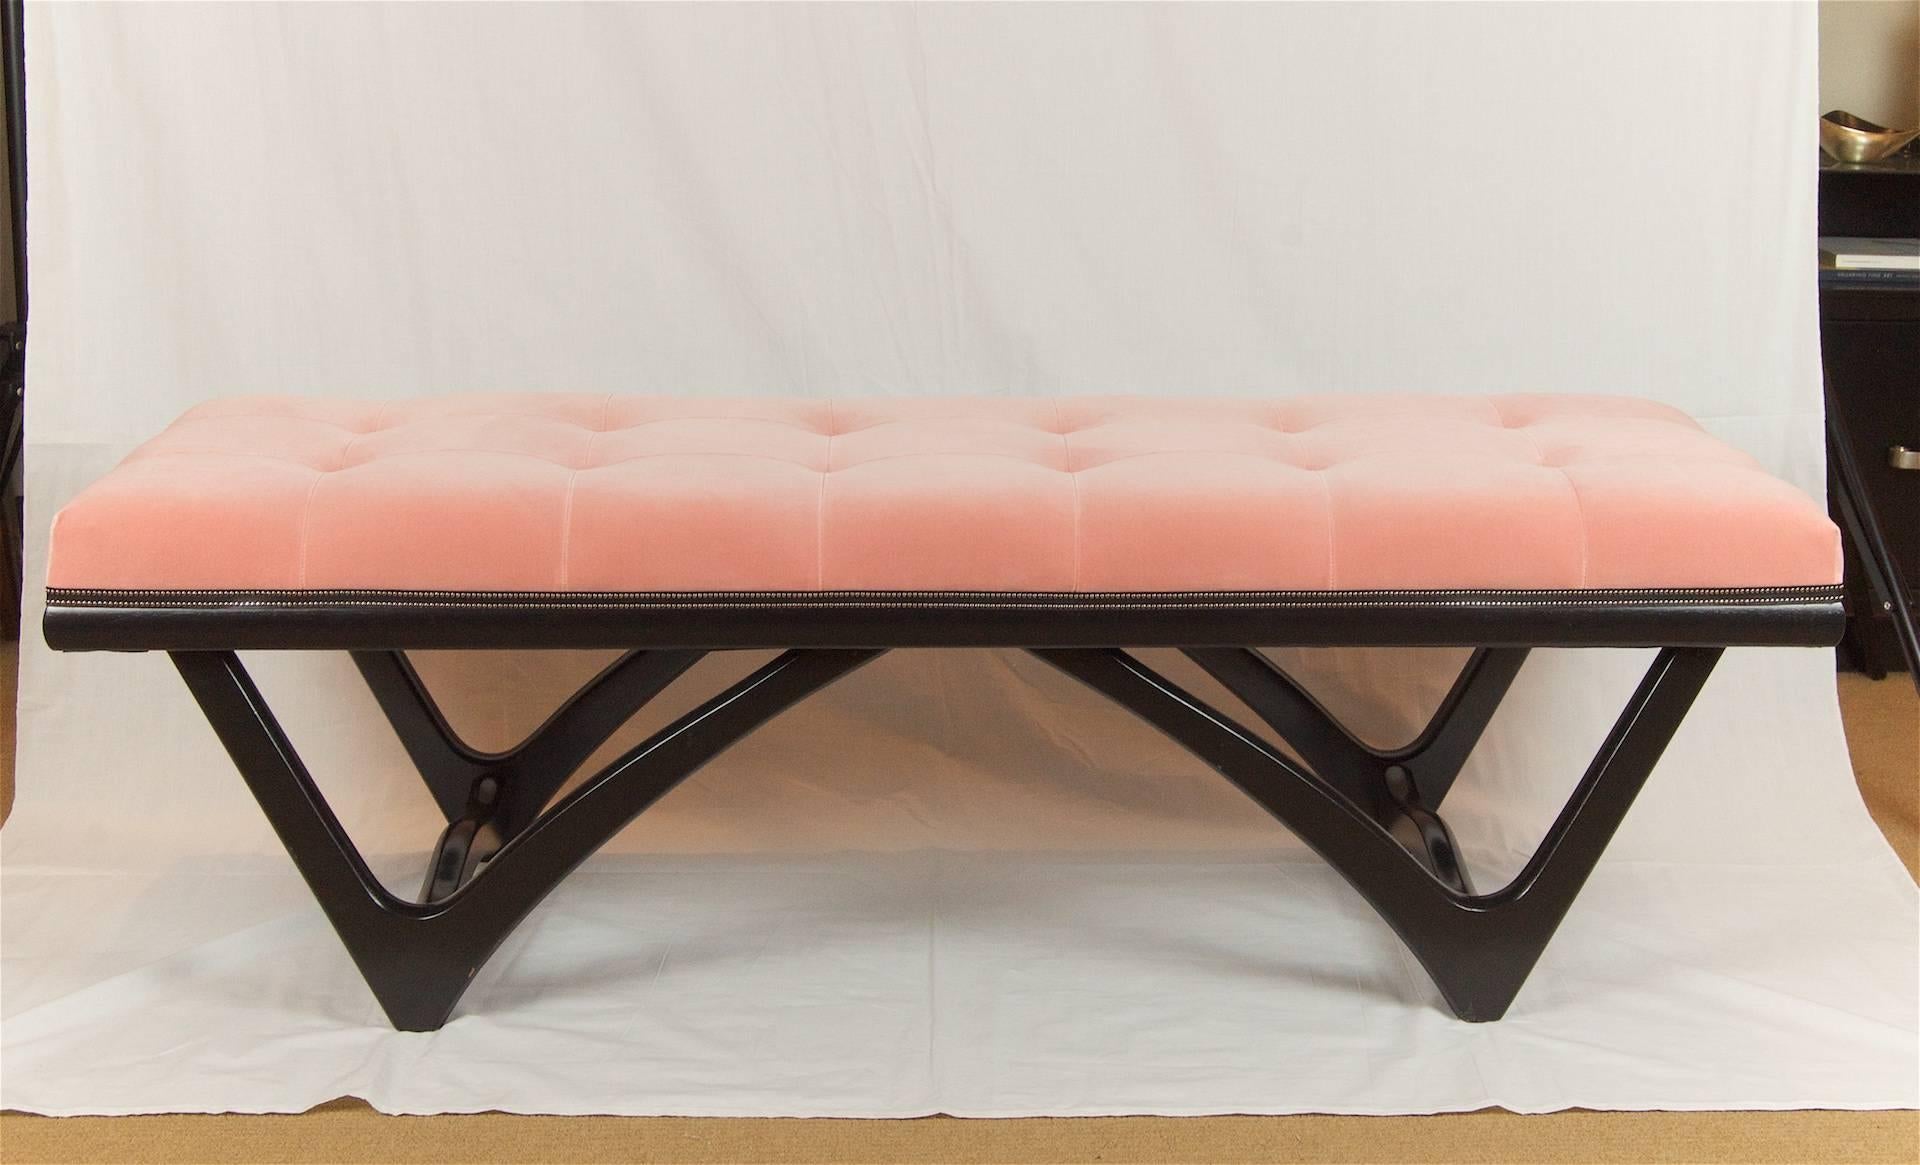 American Tufted Coral Velvet Upholstered Bench with Black Lacquer Base